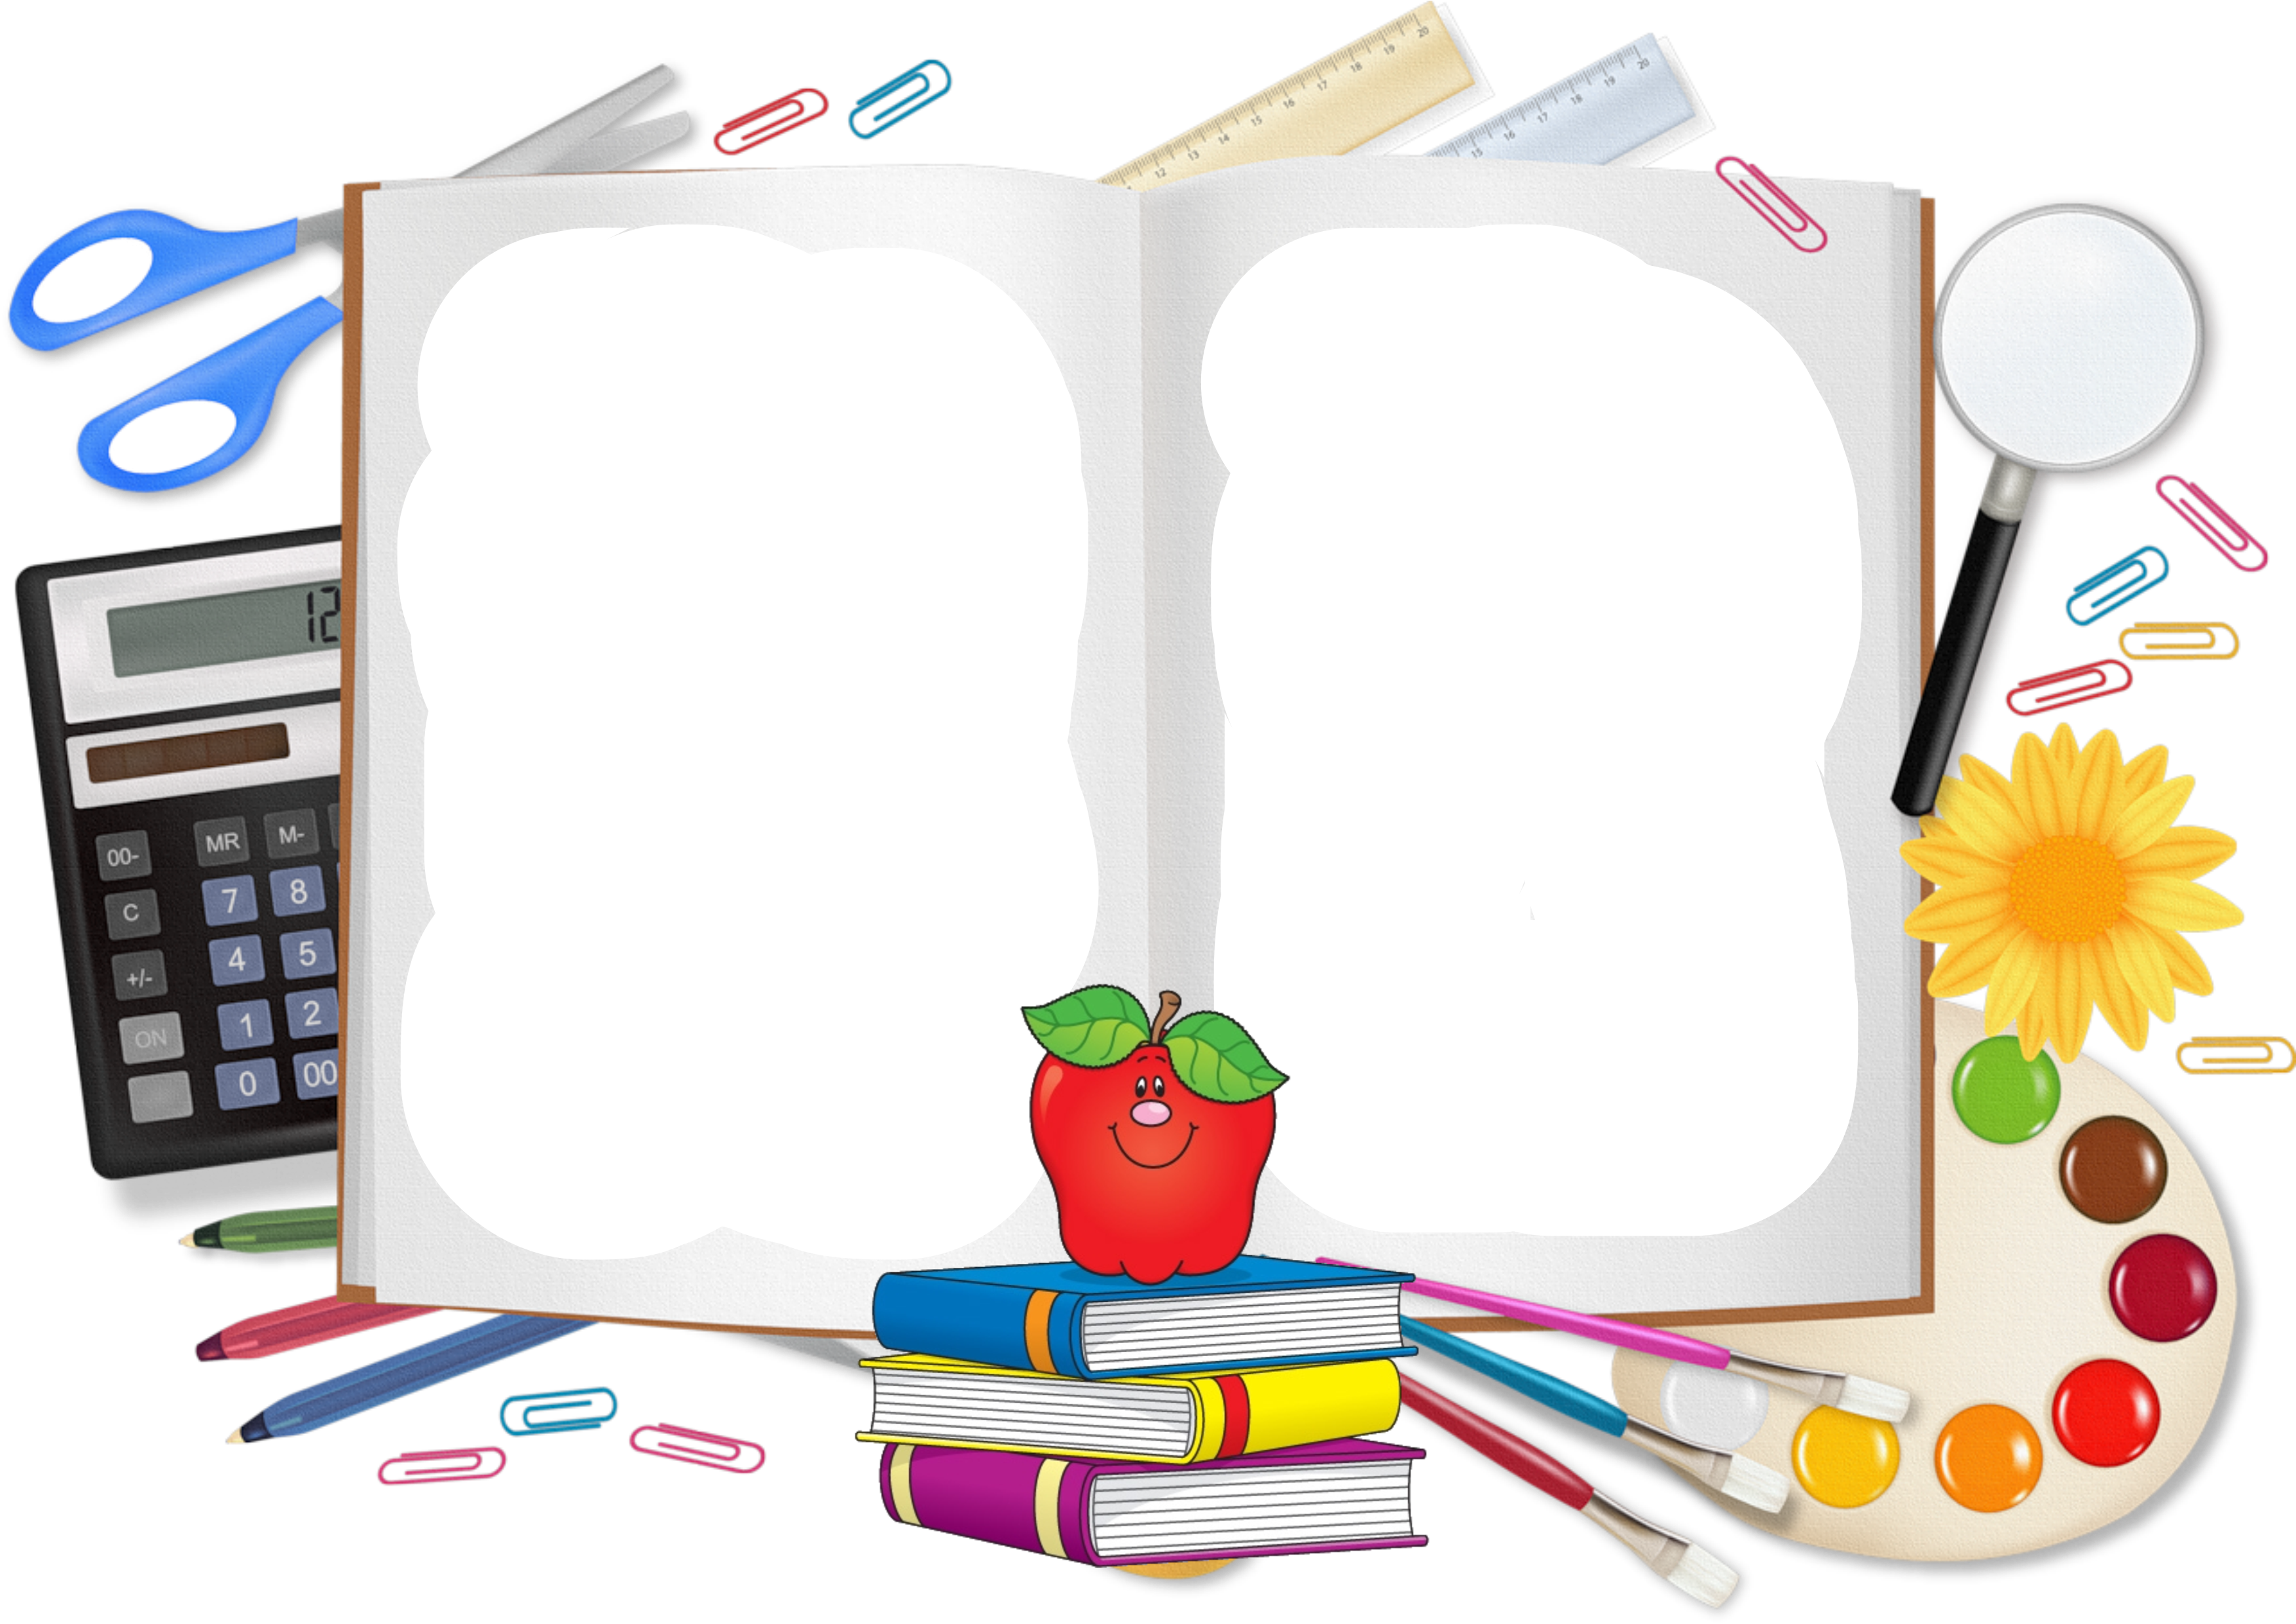 Free Png Hd For School Use Transparent Hd For School Usepng Images 239